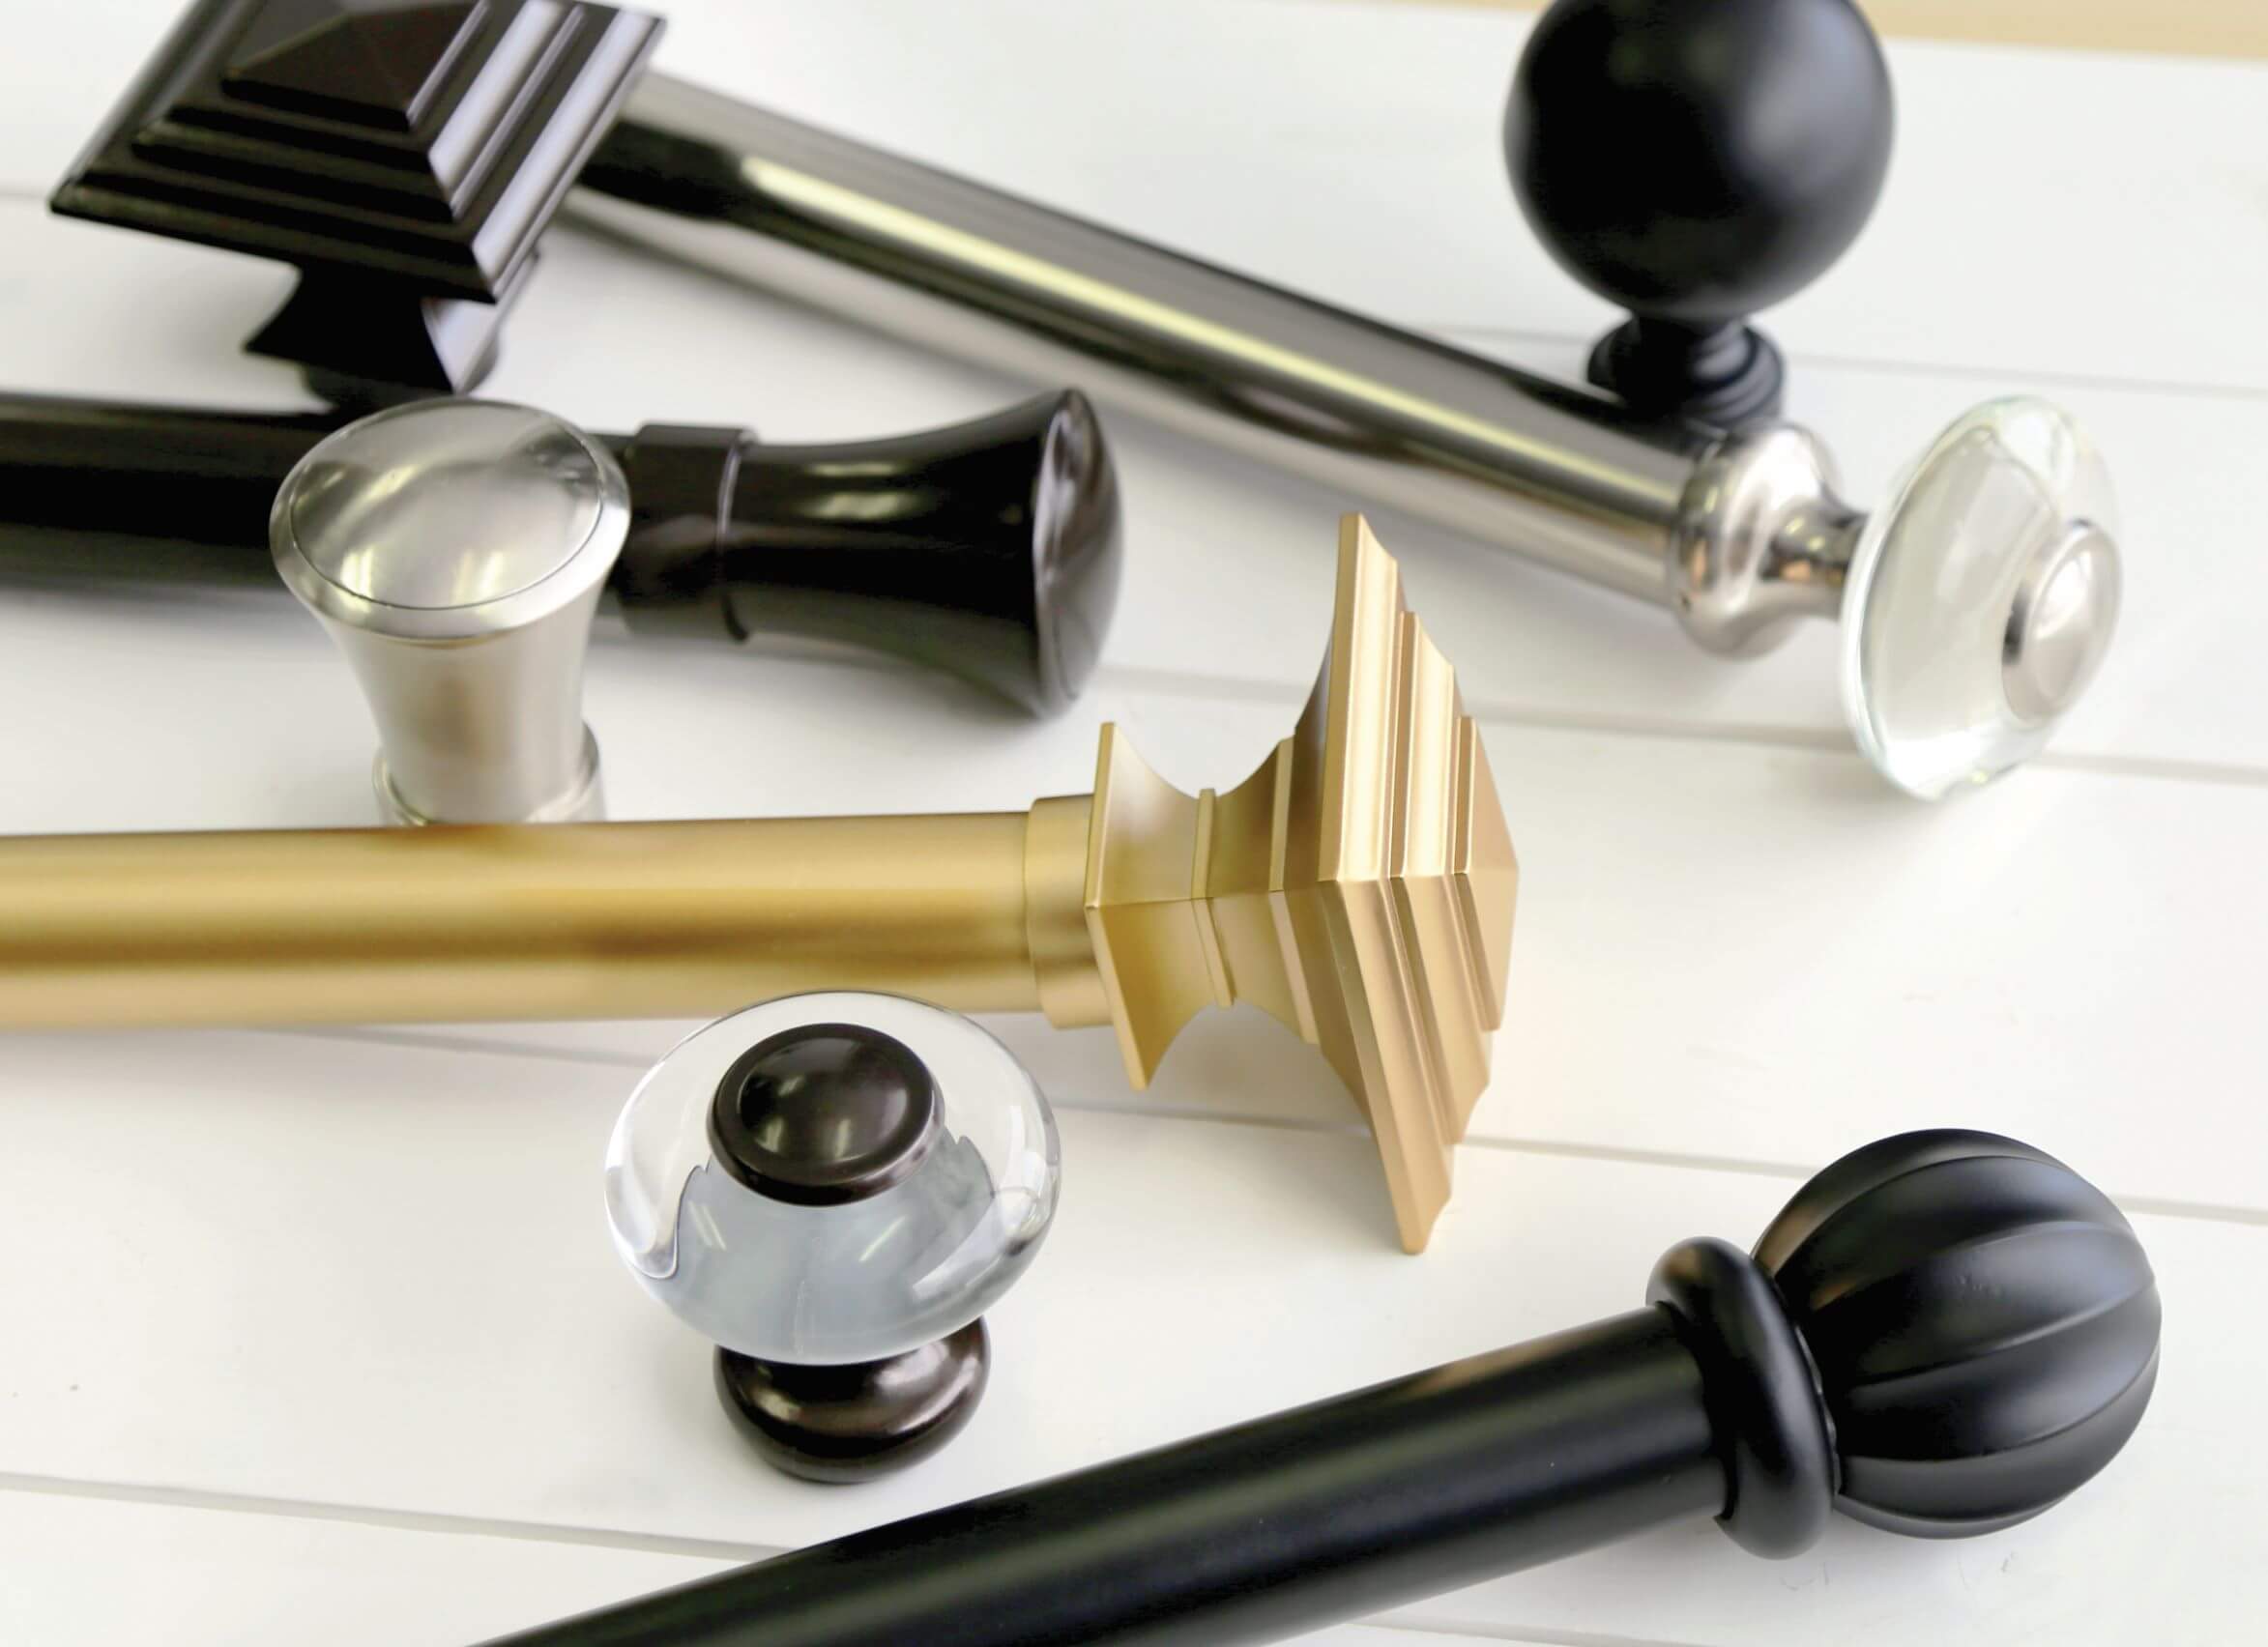 Finials are the pieces that attach to the ends of the curtain rod to add a decorative finish and keep everything in place. 